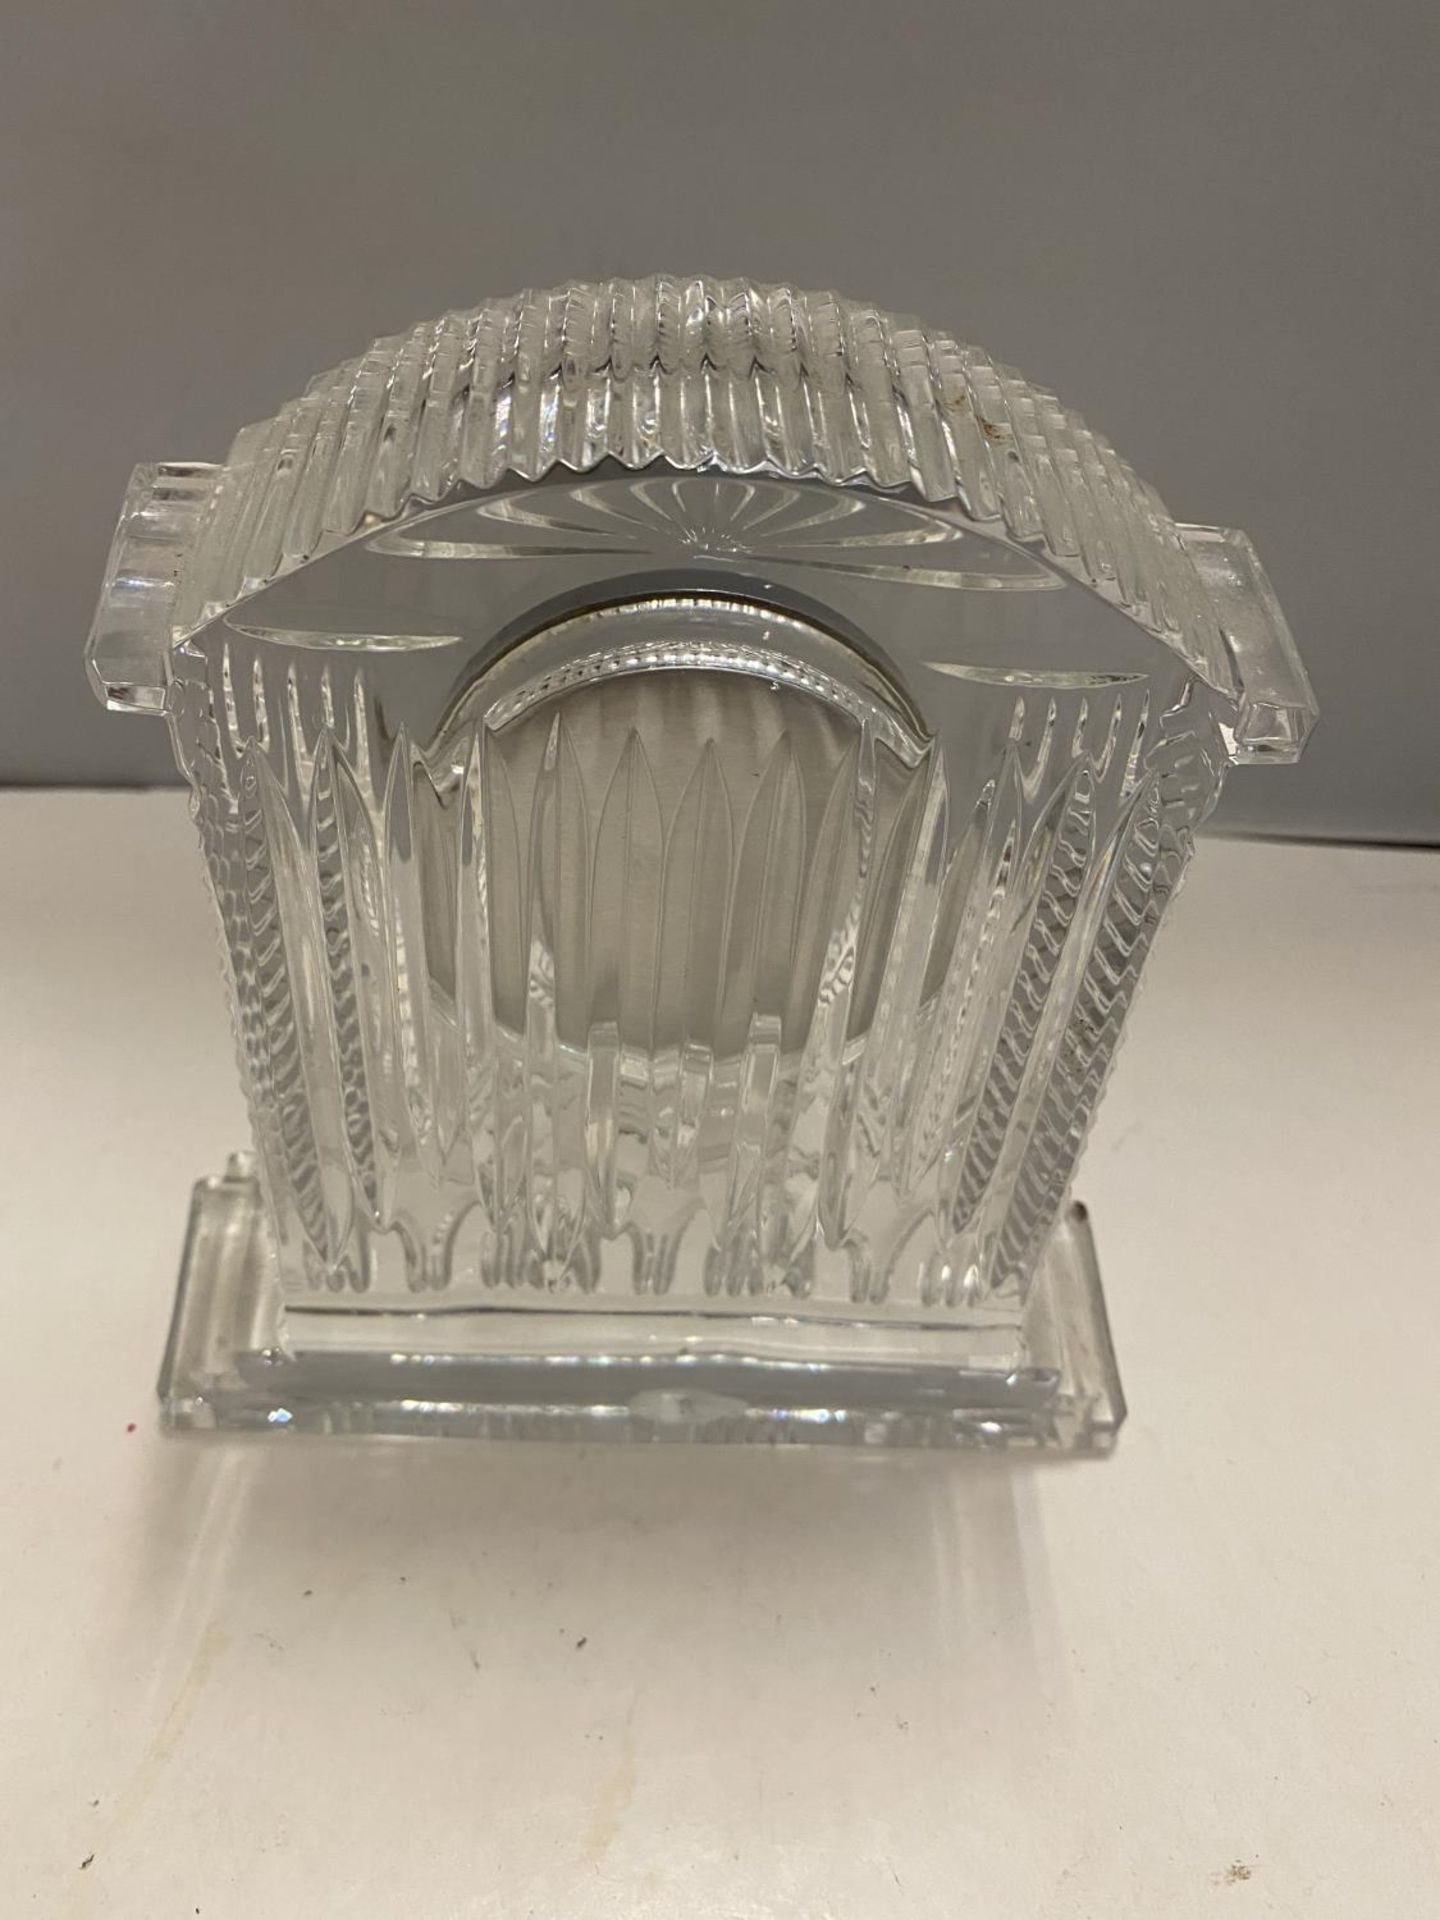 A WATERFORD CRYSTAL MANTLE CLOCK - Image 2 of 2